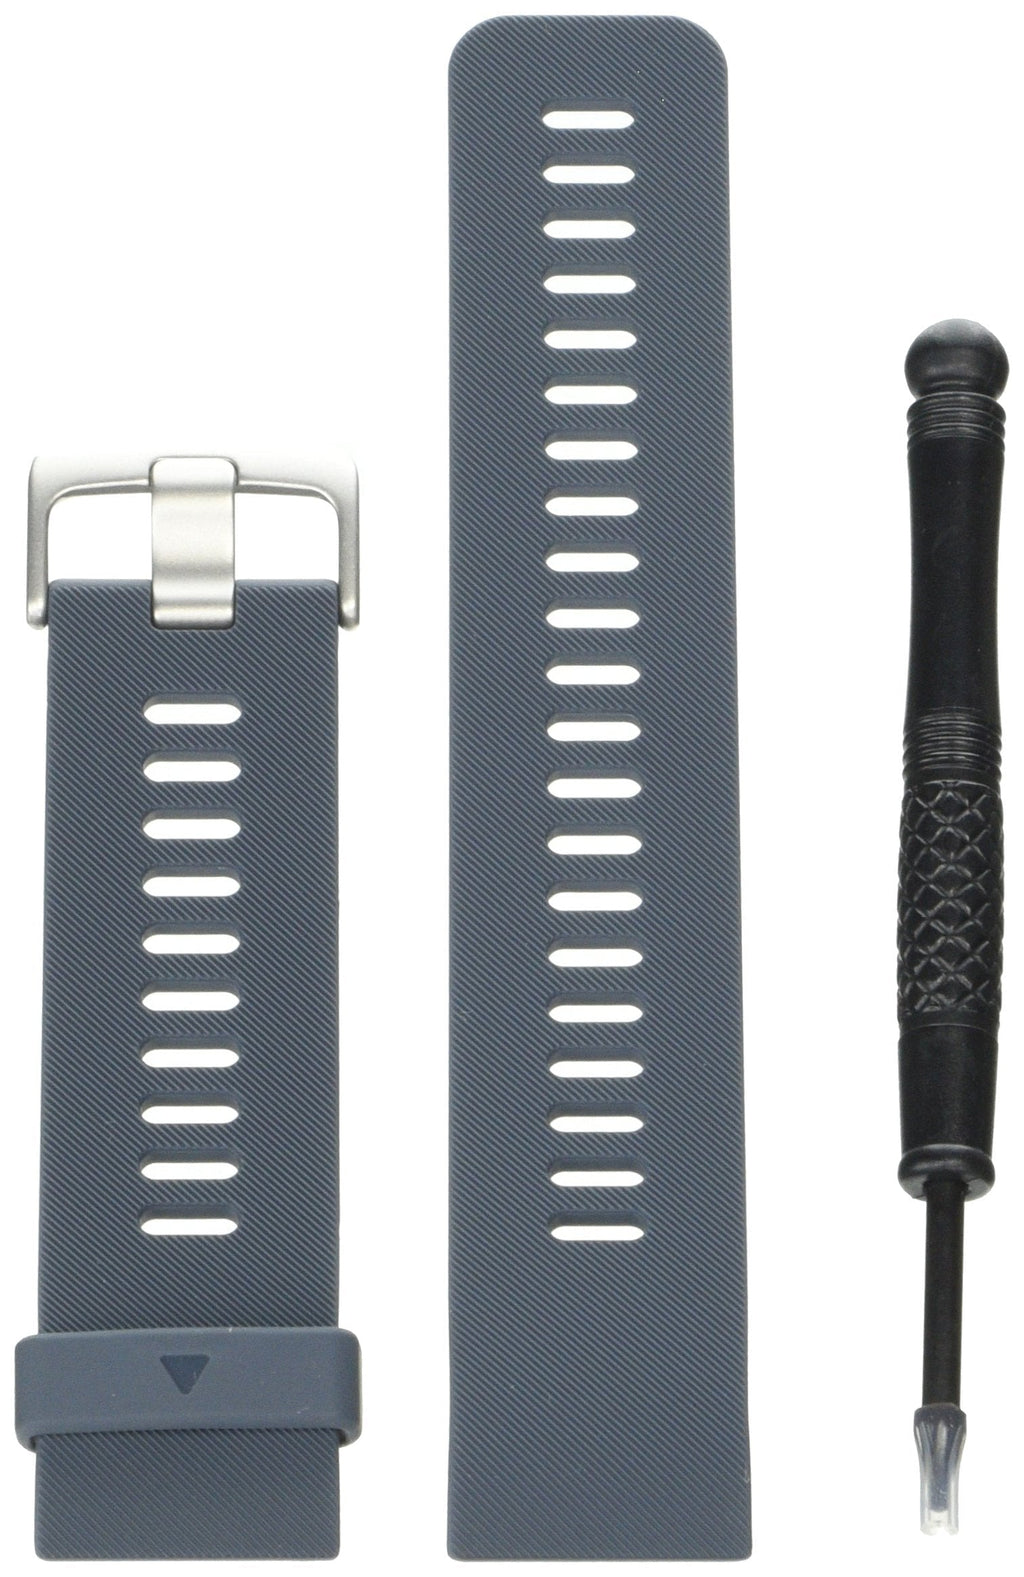 Garmin Approach S10 Replacement Watch Band, Granite Blue Silicone, (010-12795-00)